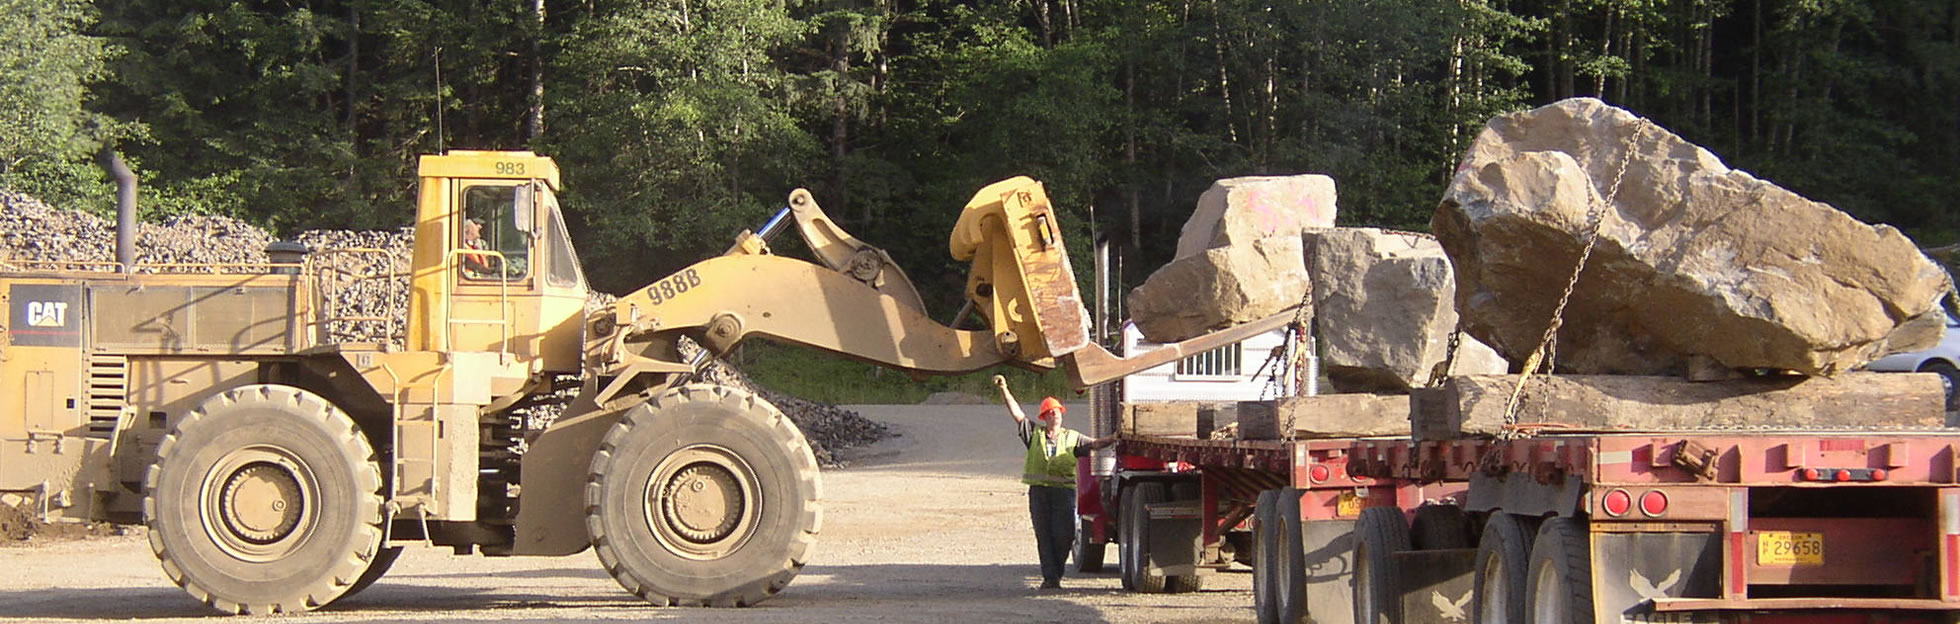 articulated loader placing large rock on truck